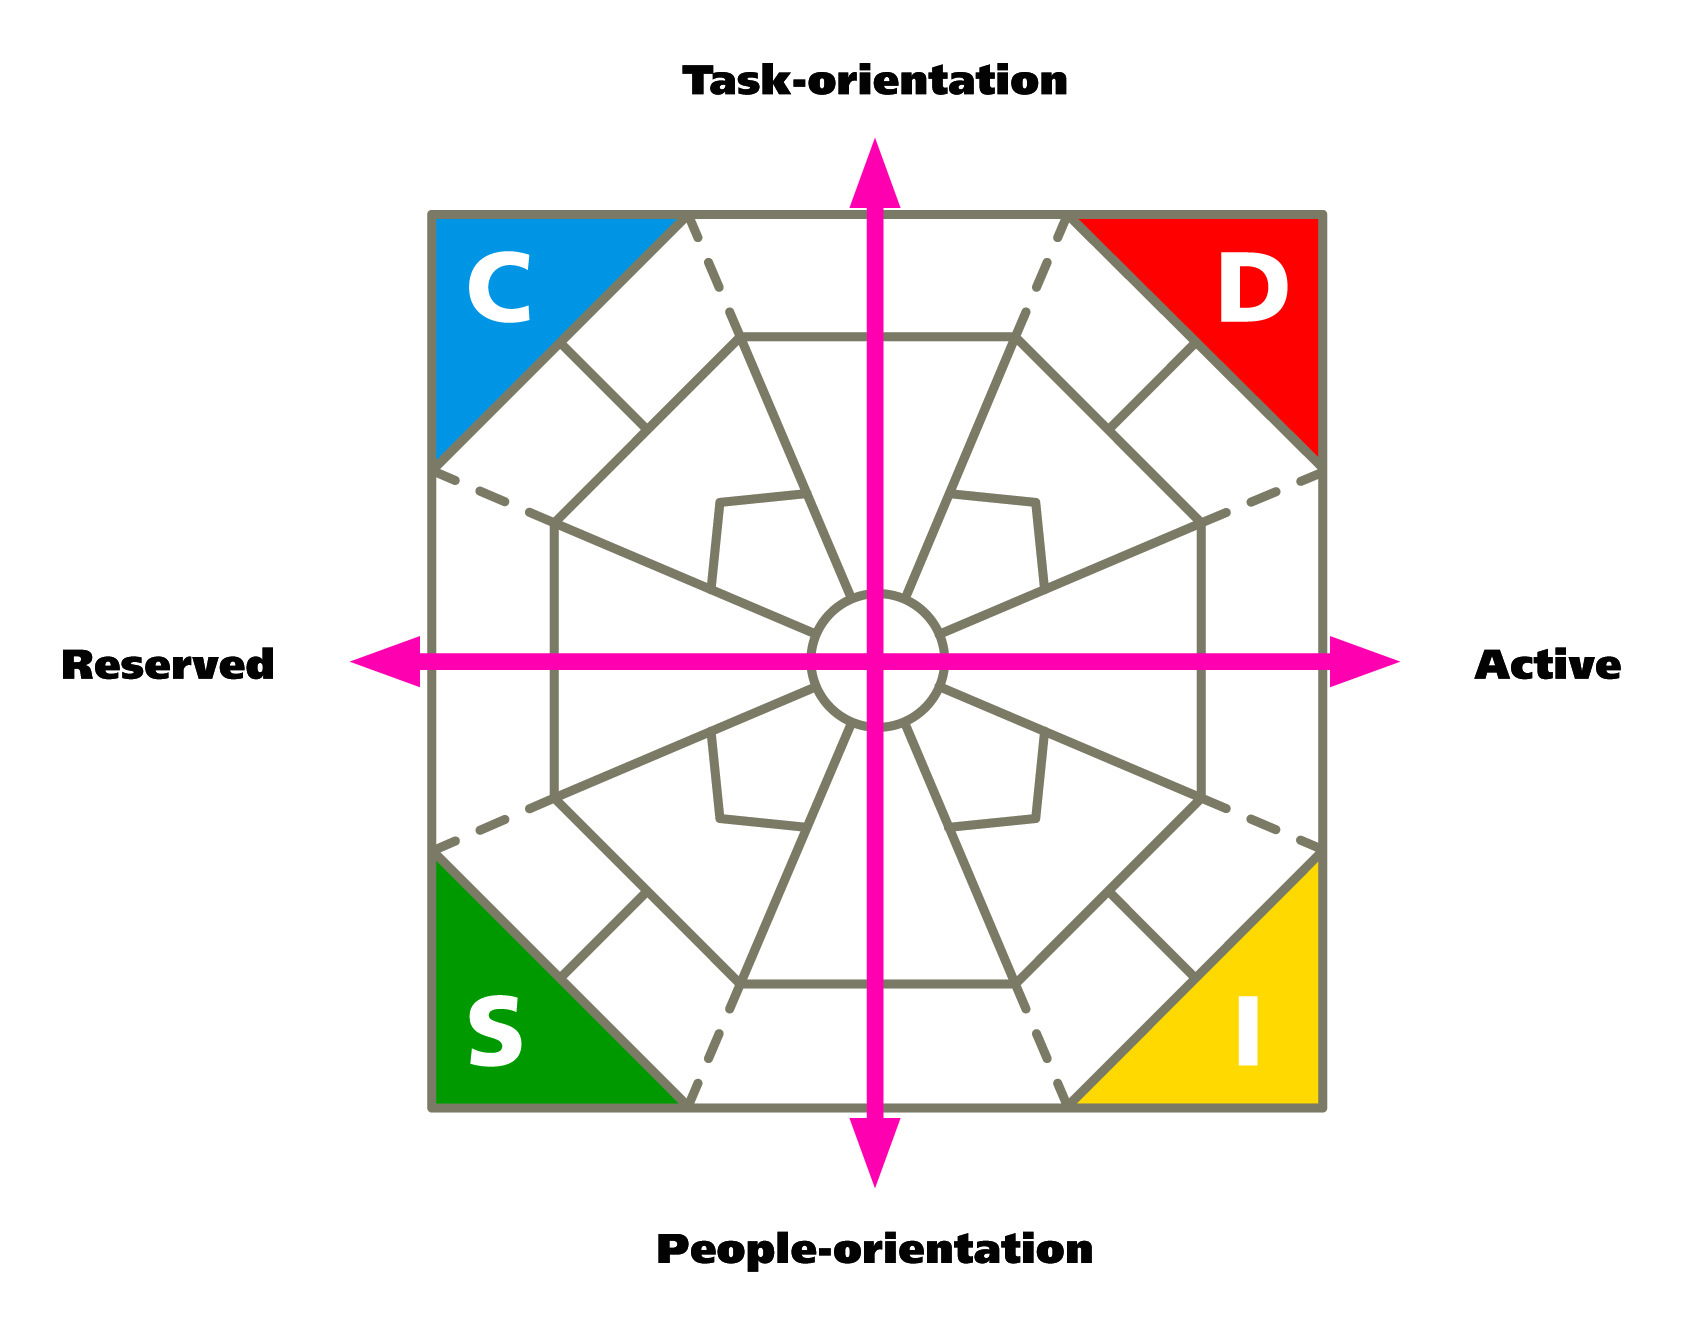 Extended DISC Diamond identifying Task, Reserved, Active, and people